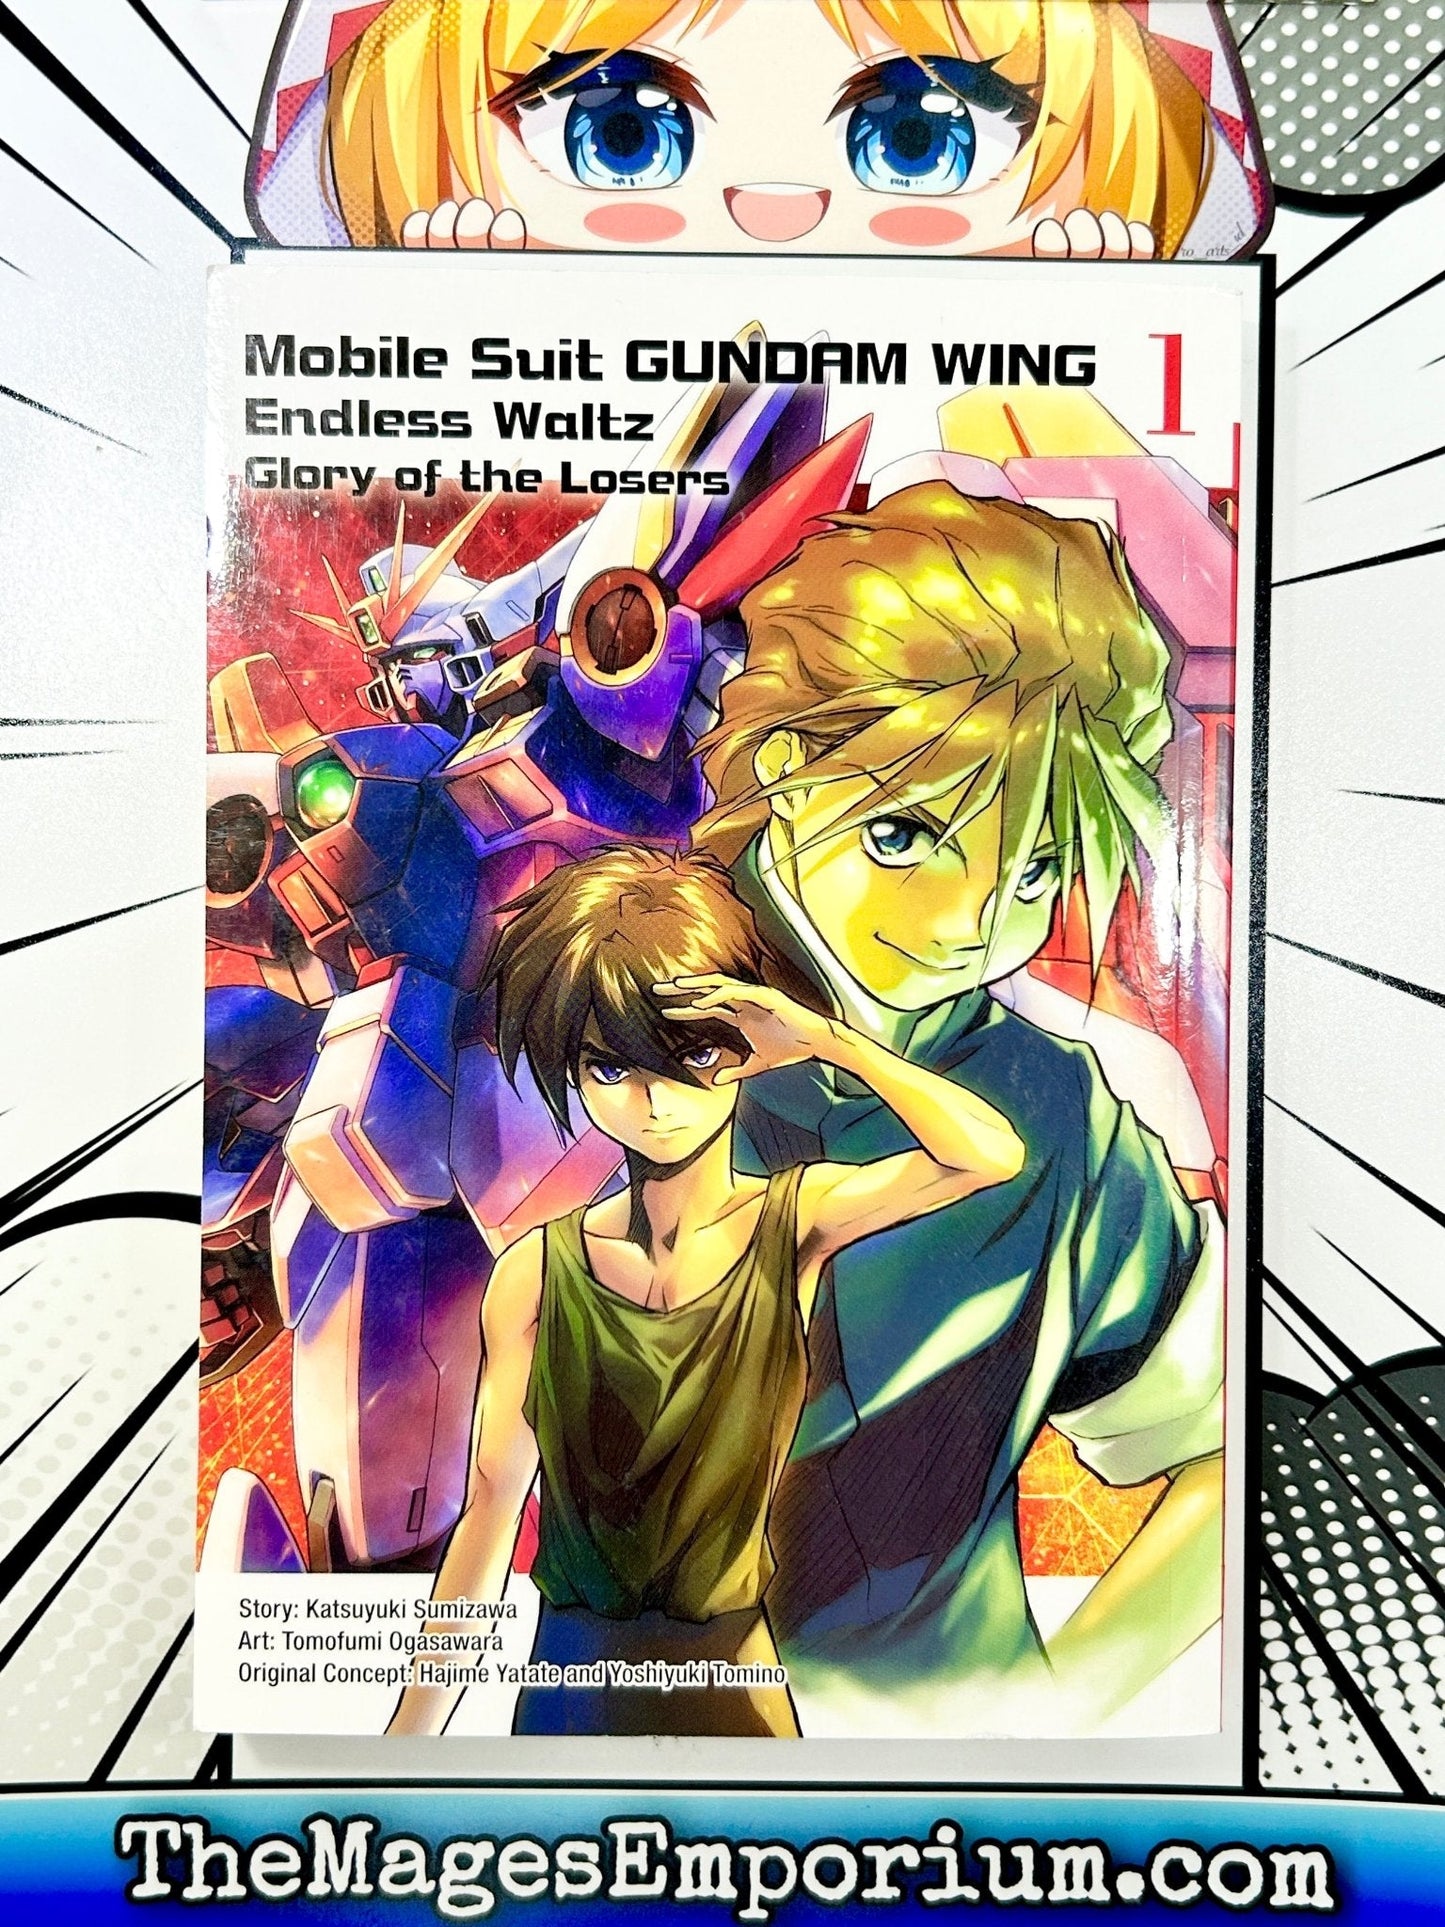 Mobile Suit Gundam Wing Endless Waltz Flory of the Losers Vol 1